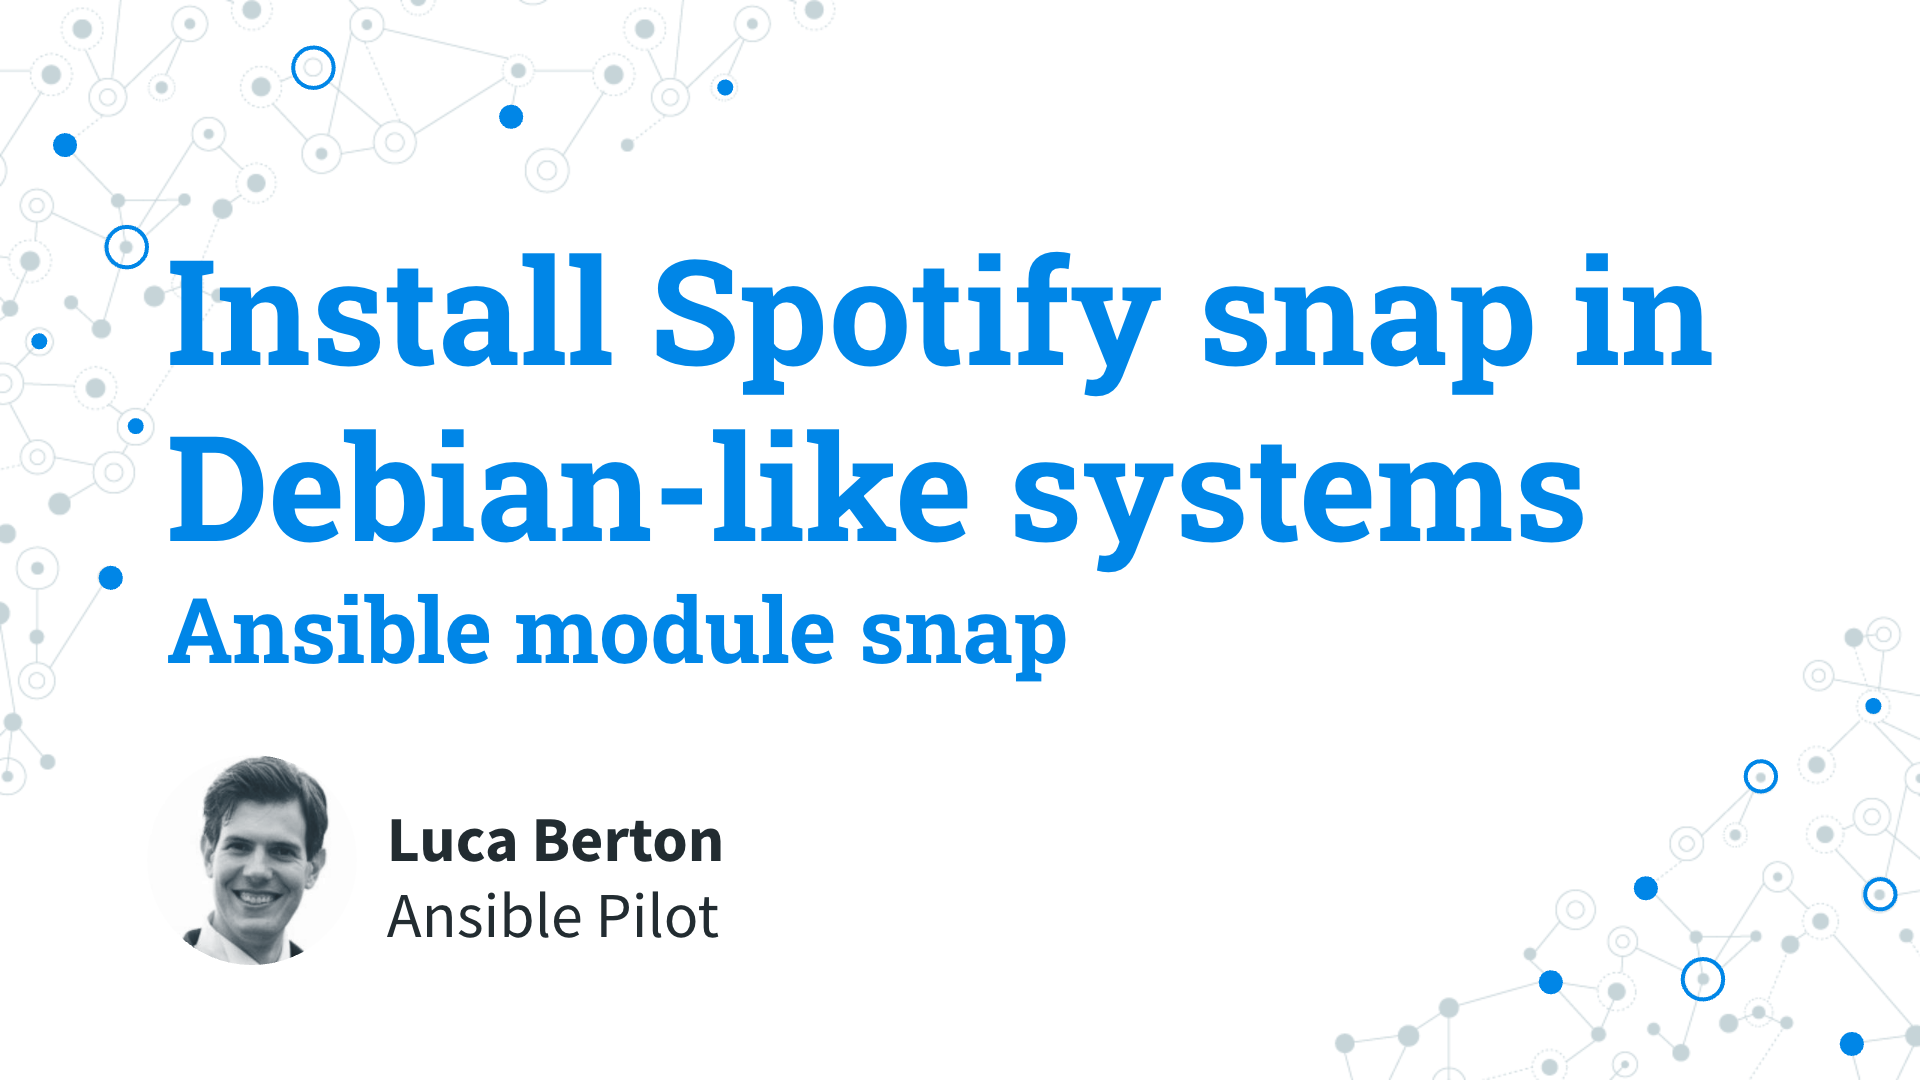 Install Spotify snap in Debian-like systems - Ansible module snap